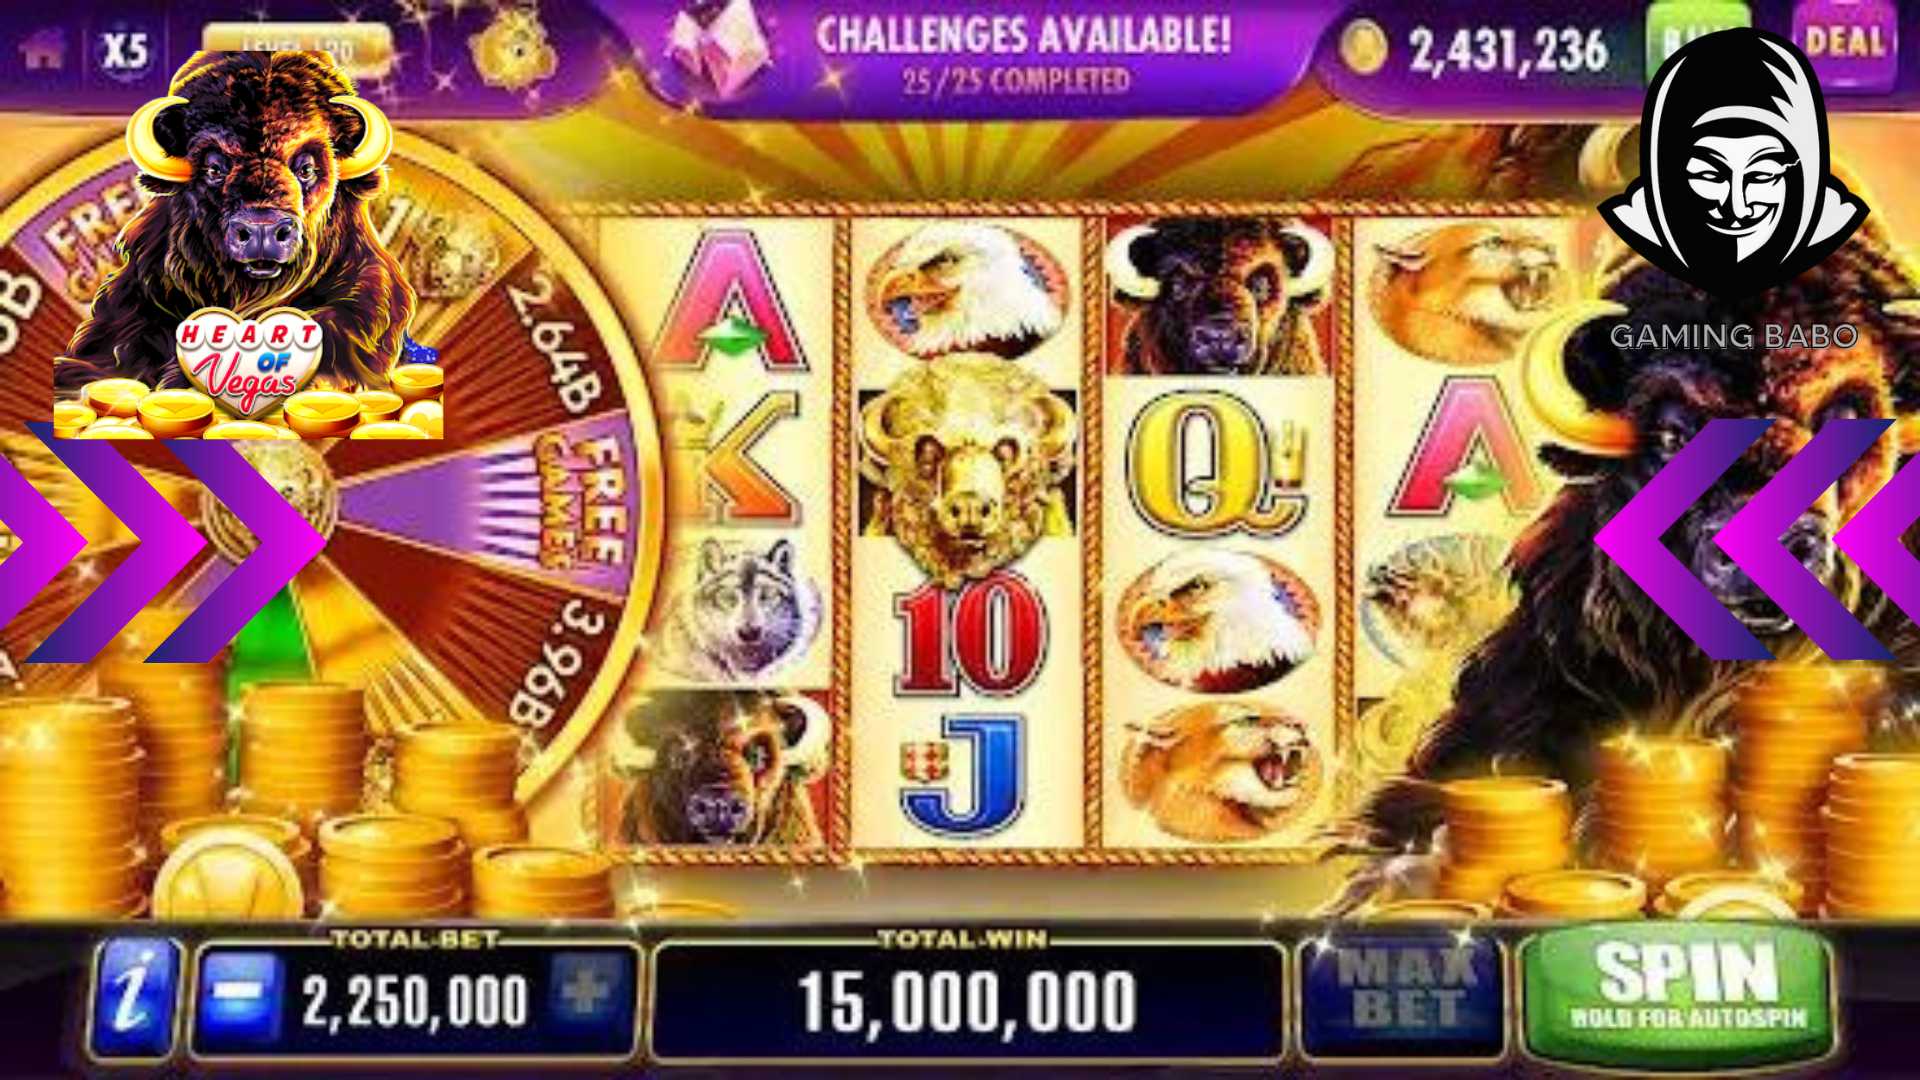 Slots Heart of Vegas tips and tricks